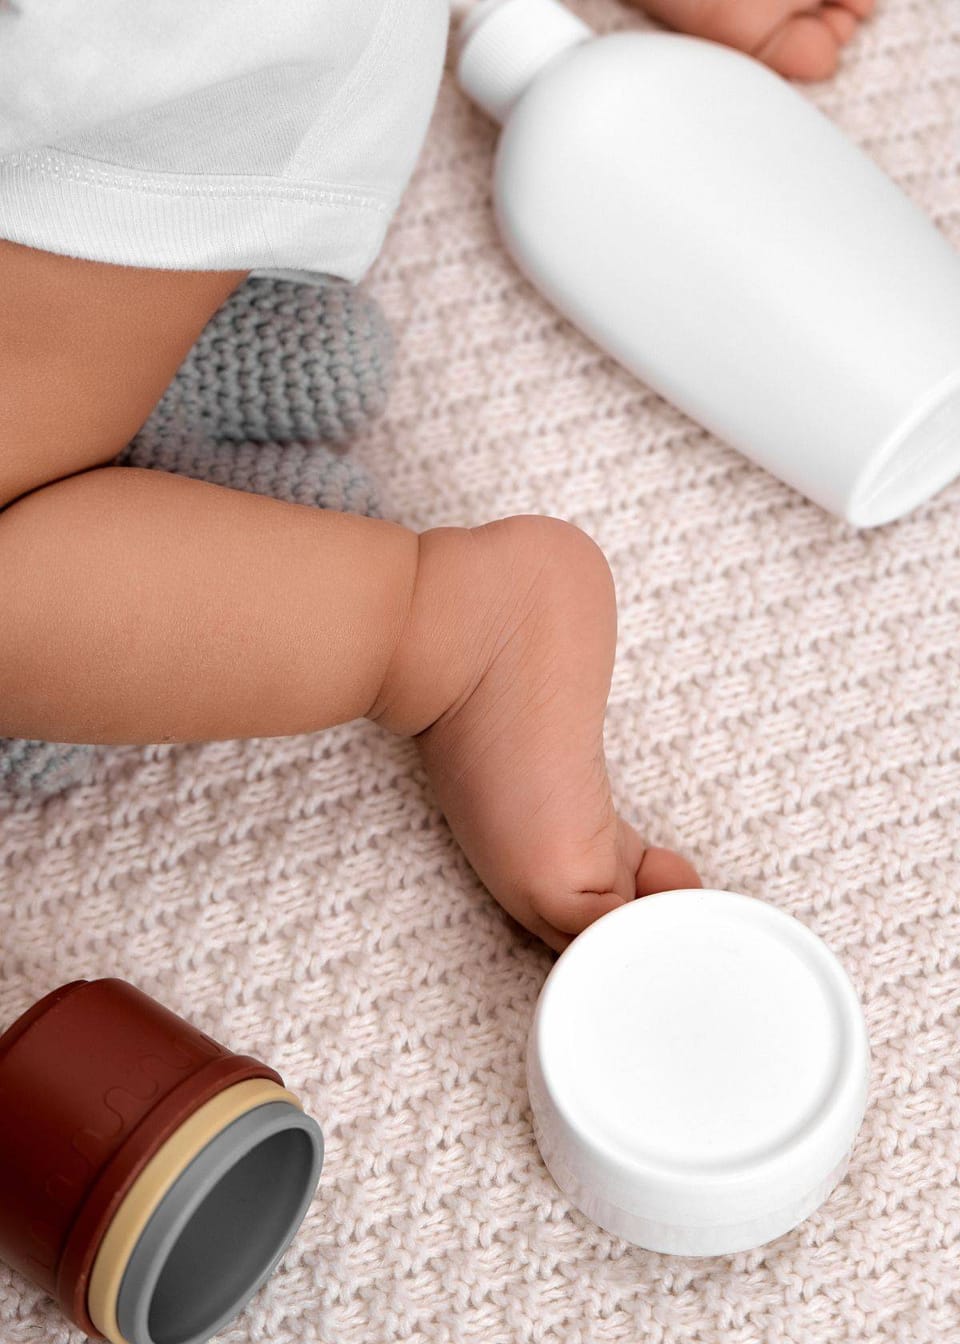 What's the Difference Between Baby Cream and Baby Lotion